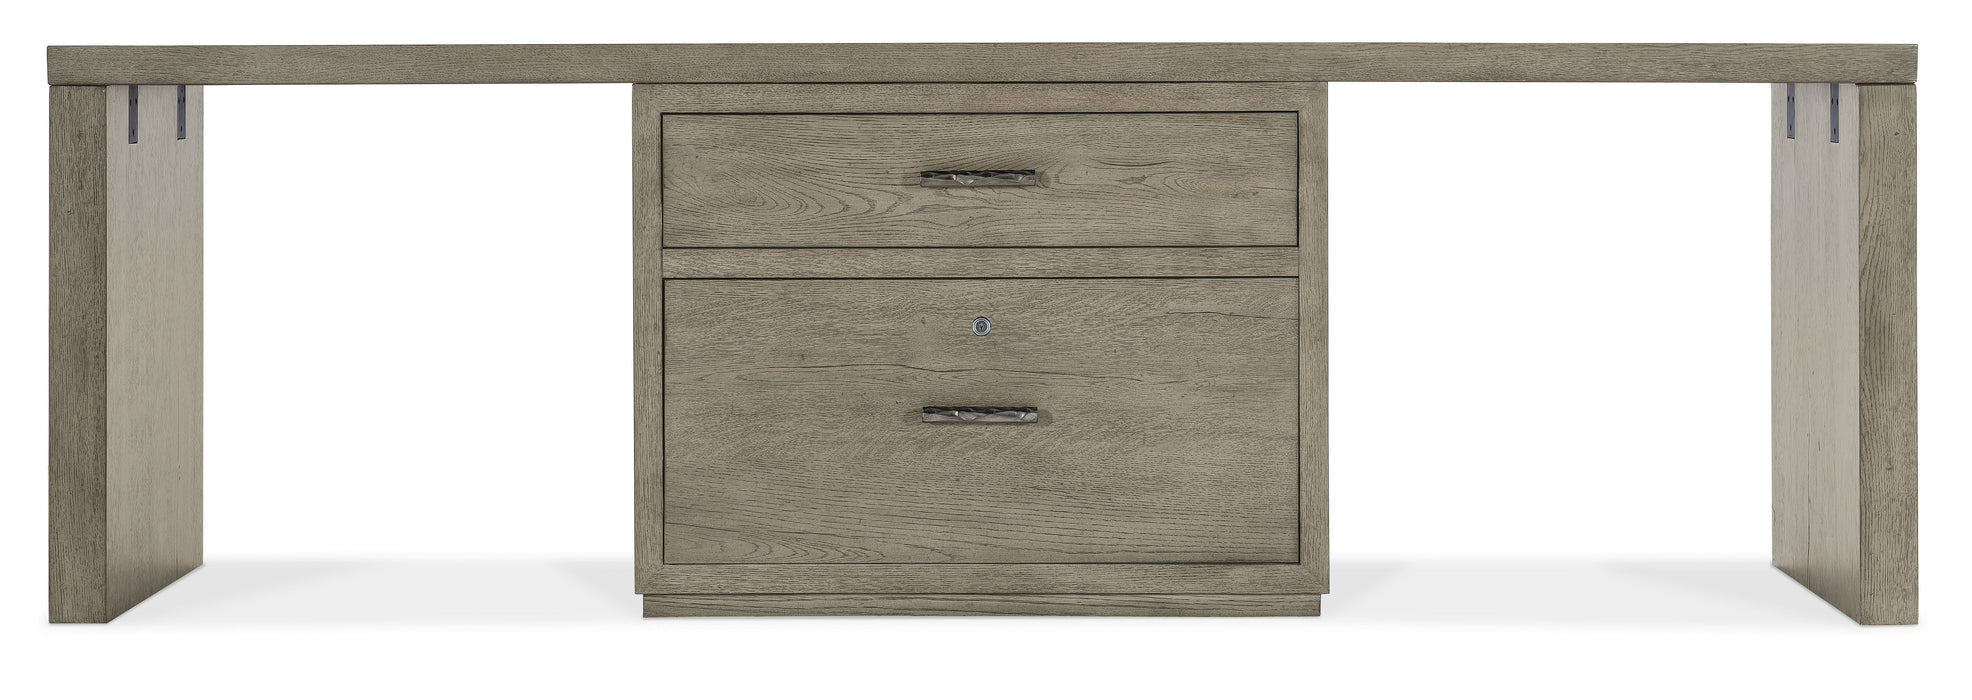 Linville Falls Desk 96" Top Lateral File And 2 Legs